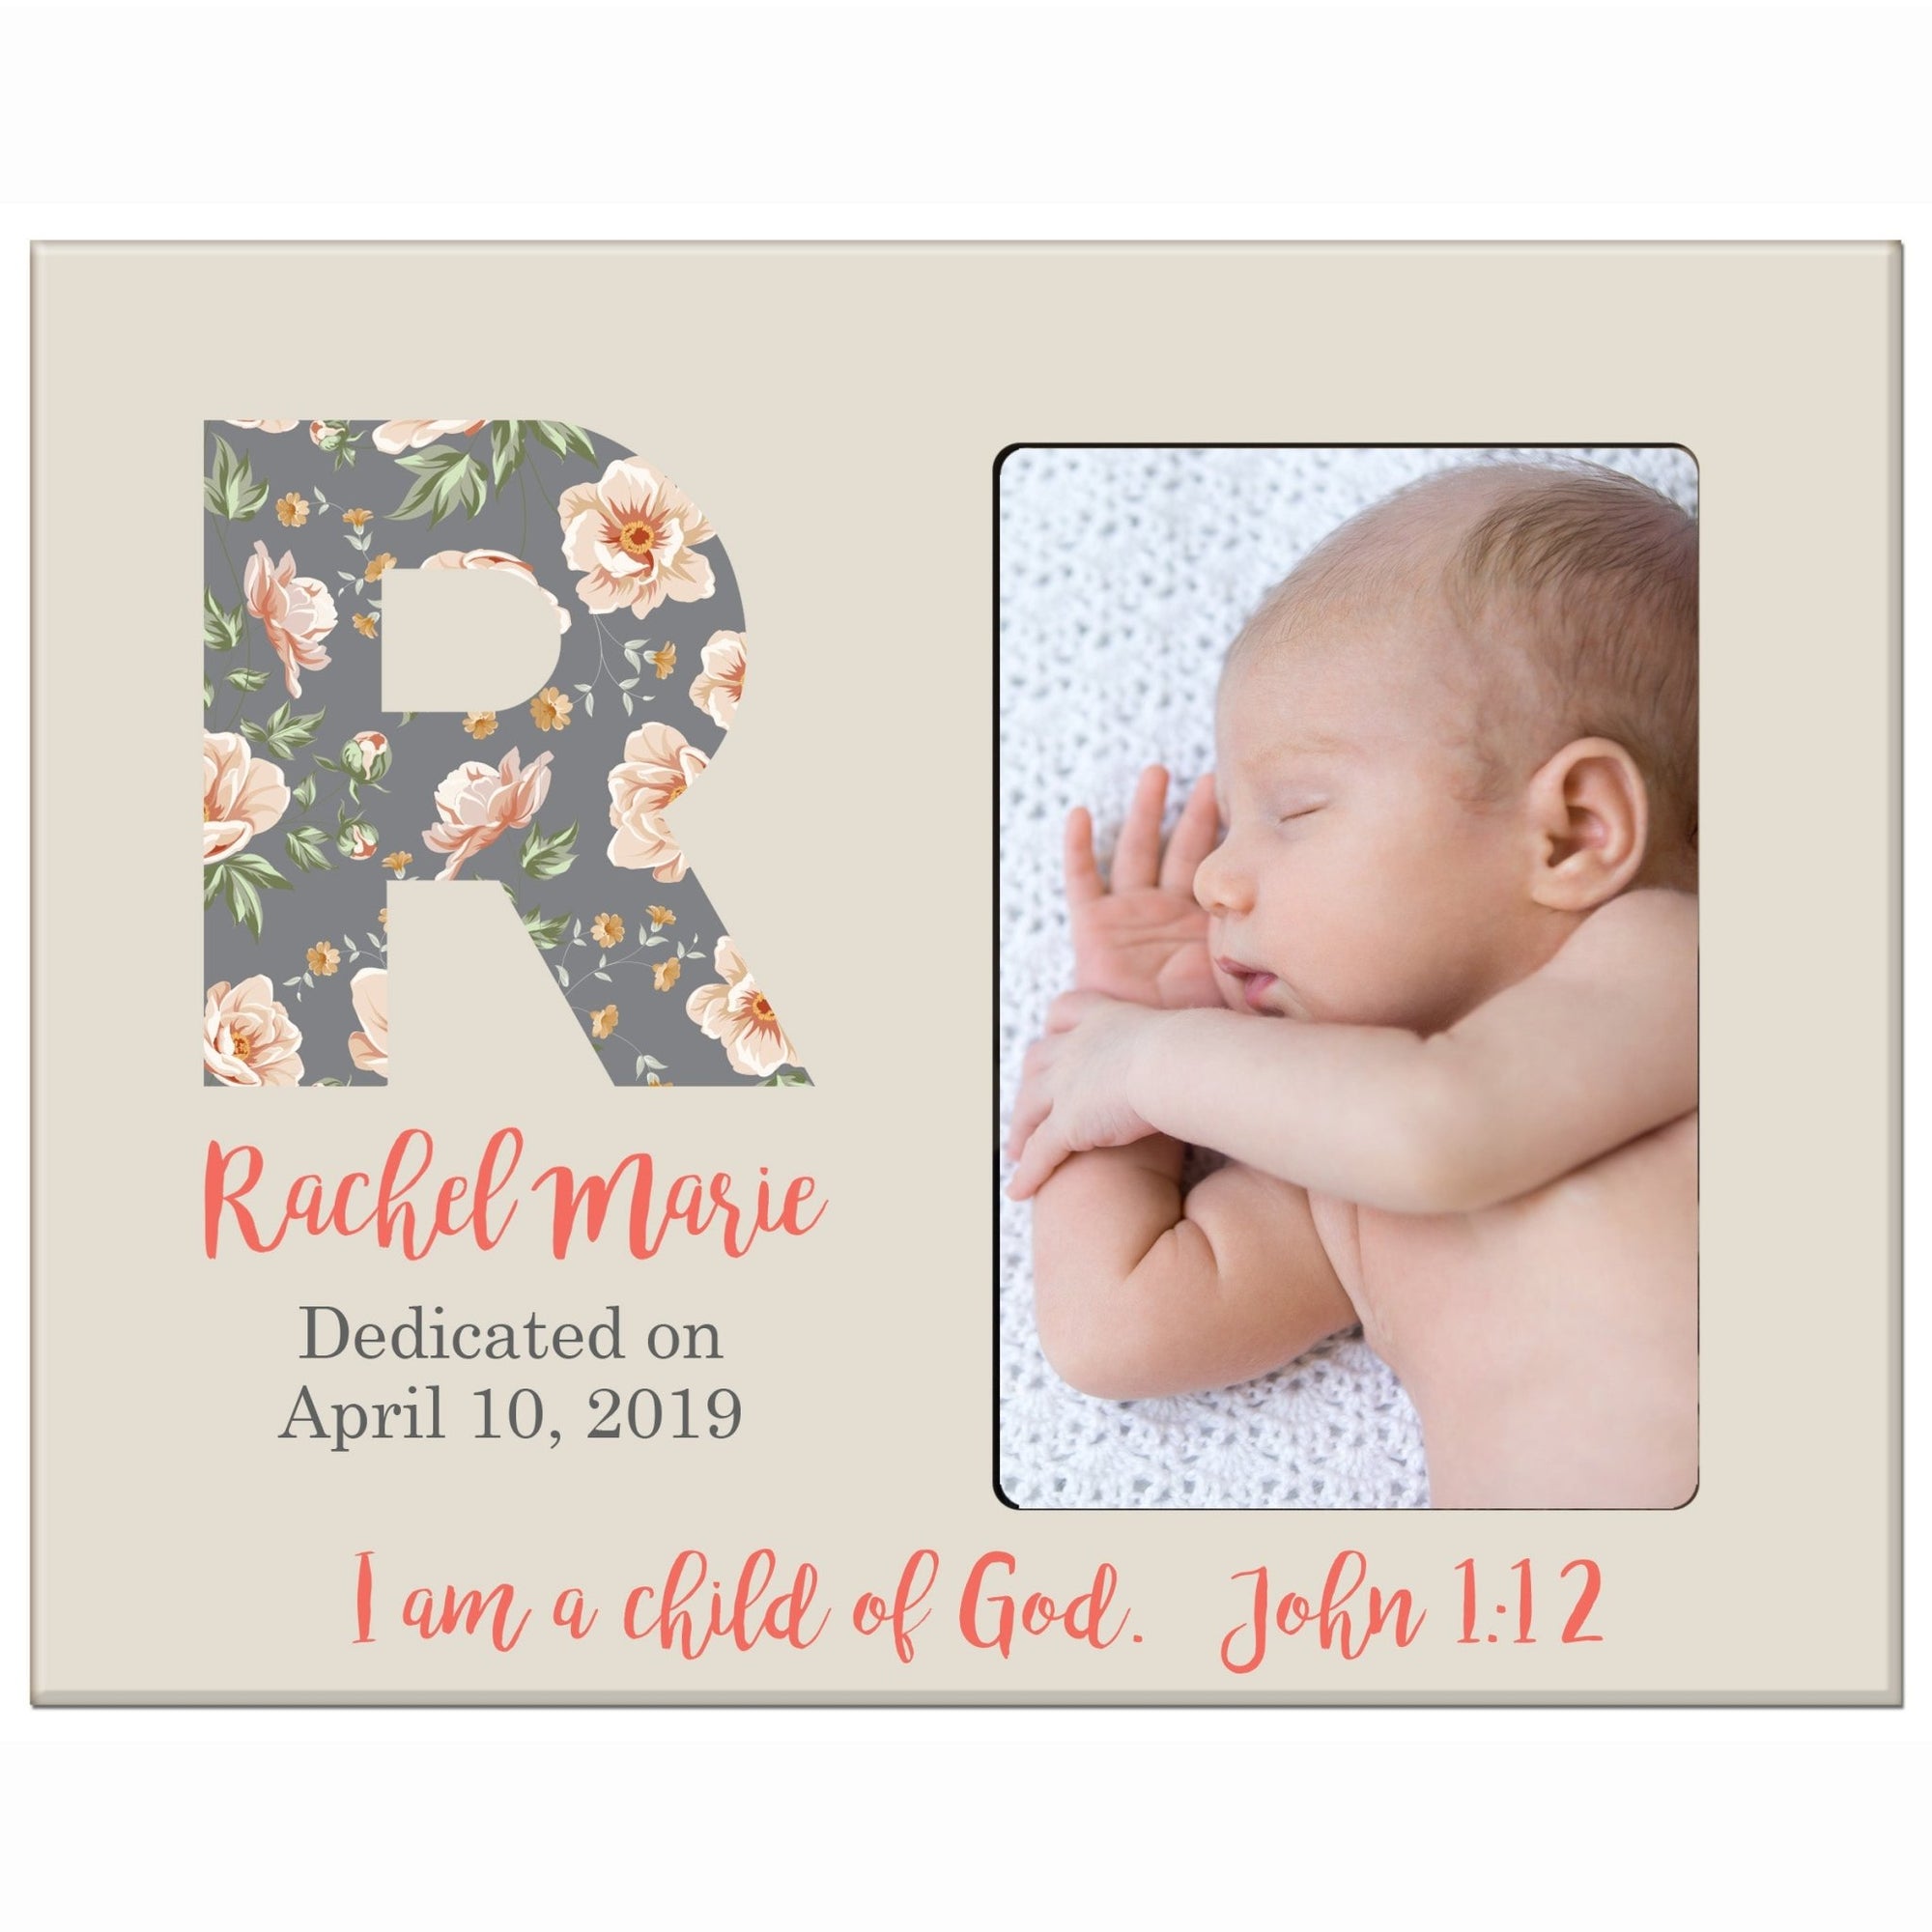 Baby Birth Announcement Photo Frame For Boys and Girls Child of God - LifeSong Milestones